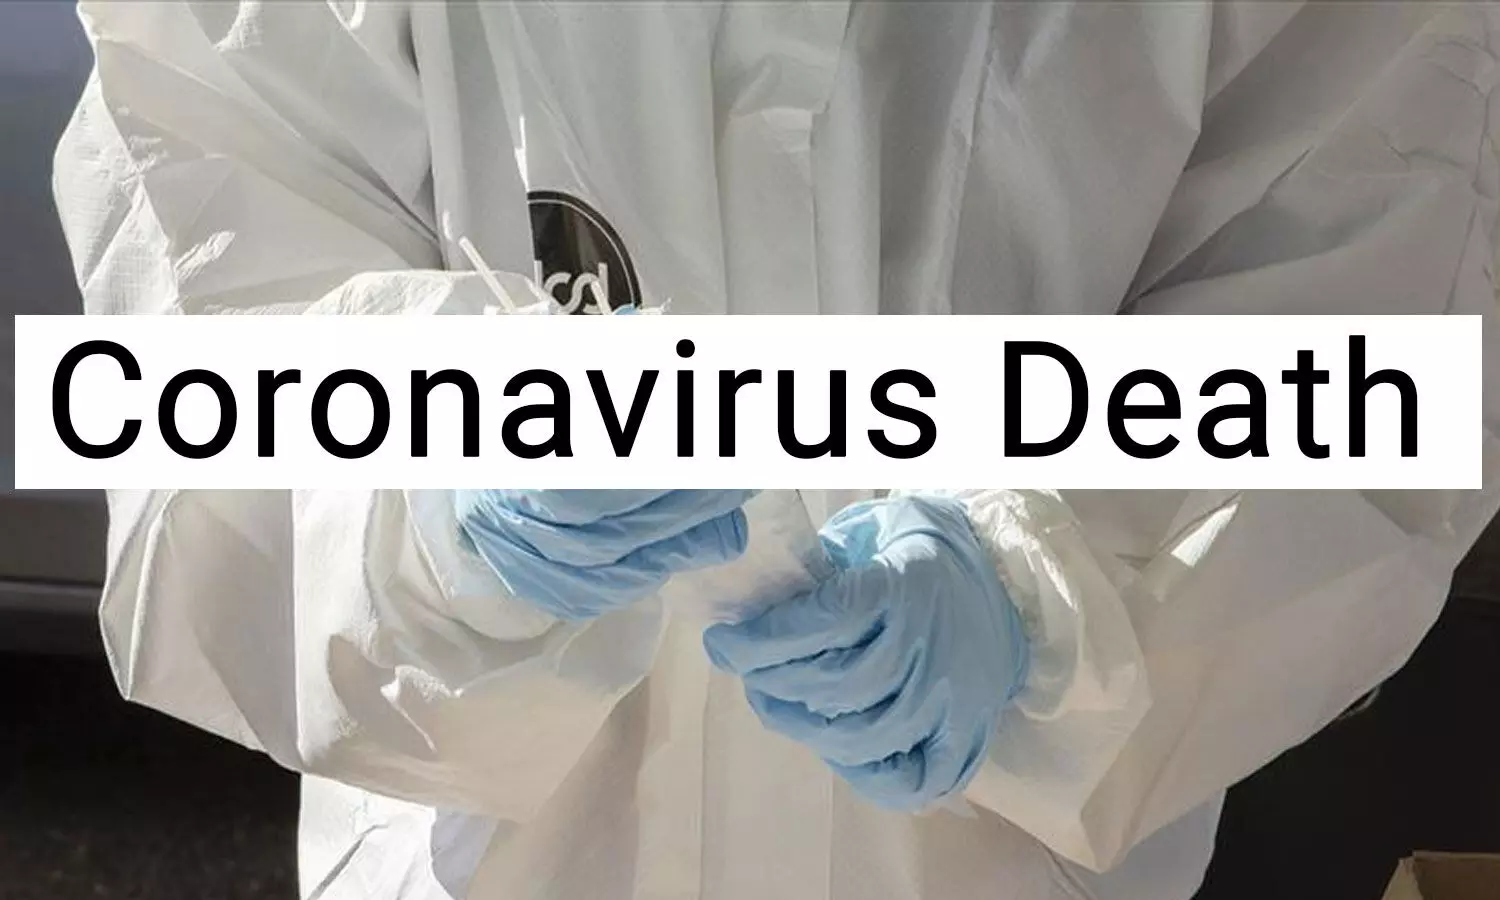 67 year old doctor dies of coronavirus in France, 1st medical casualty of the country